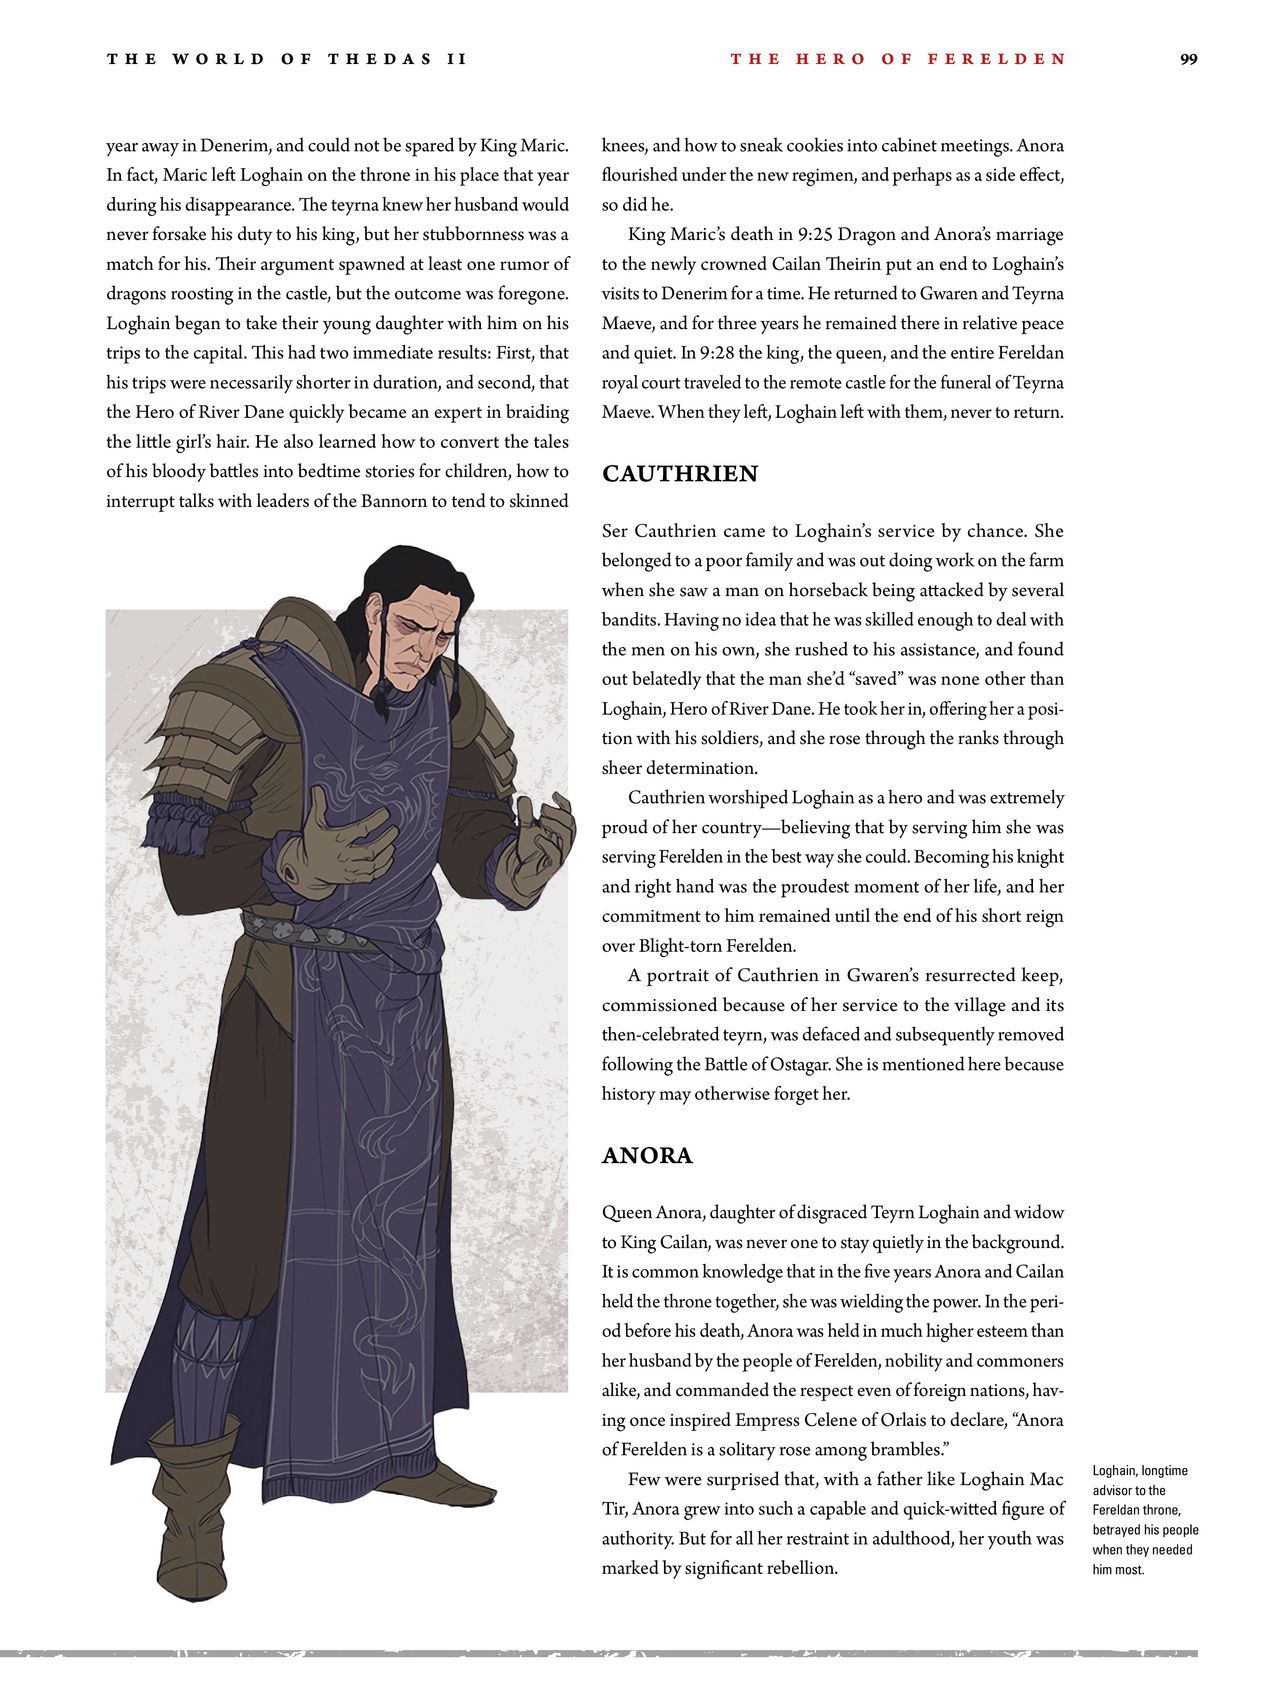 Dragon Age - The World of Thedas v02 95